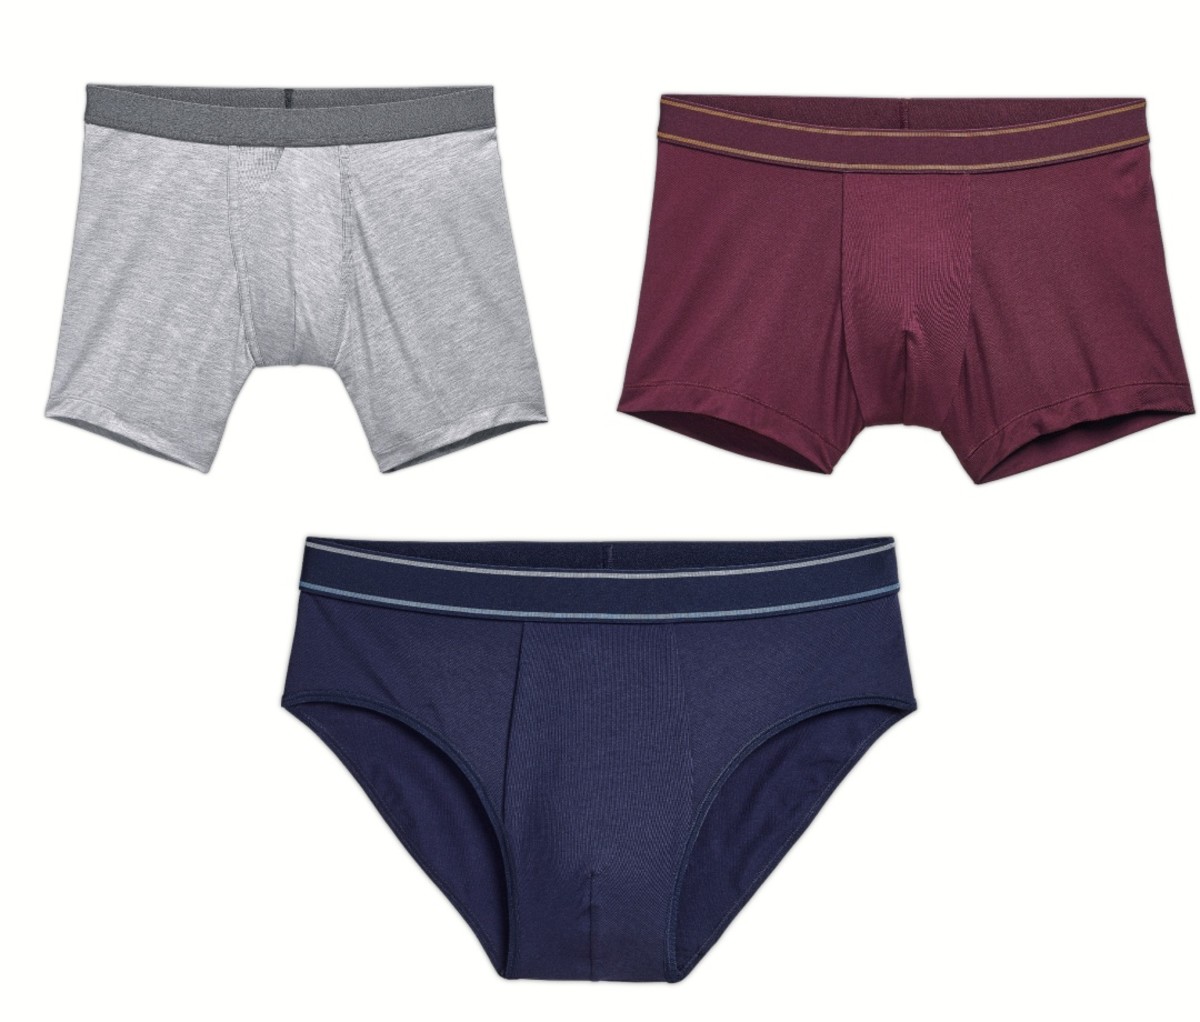 It's Here: Introducing Bombas Underwear - Bombas Email Archive